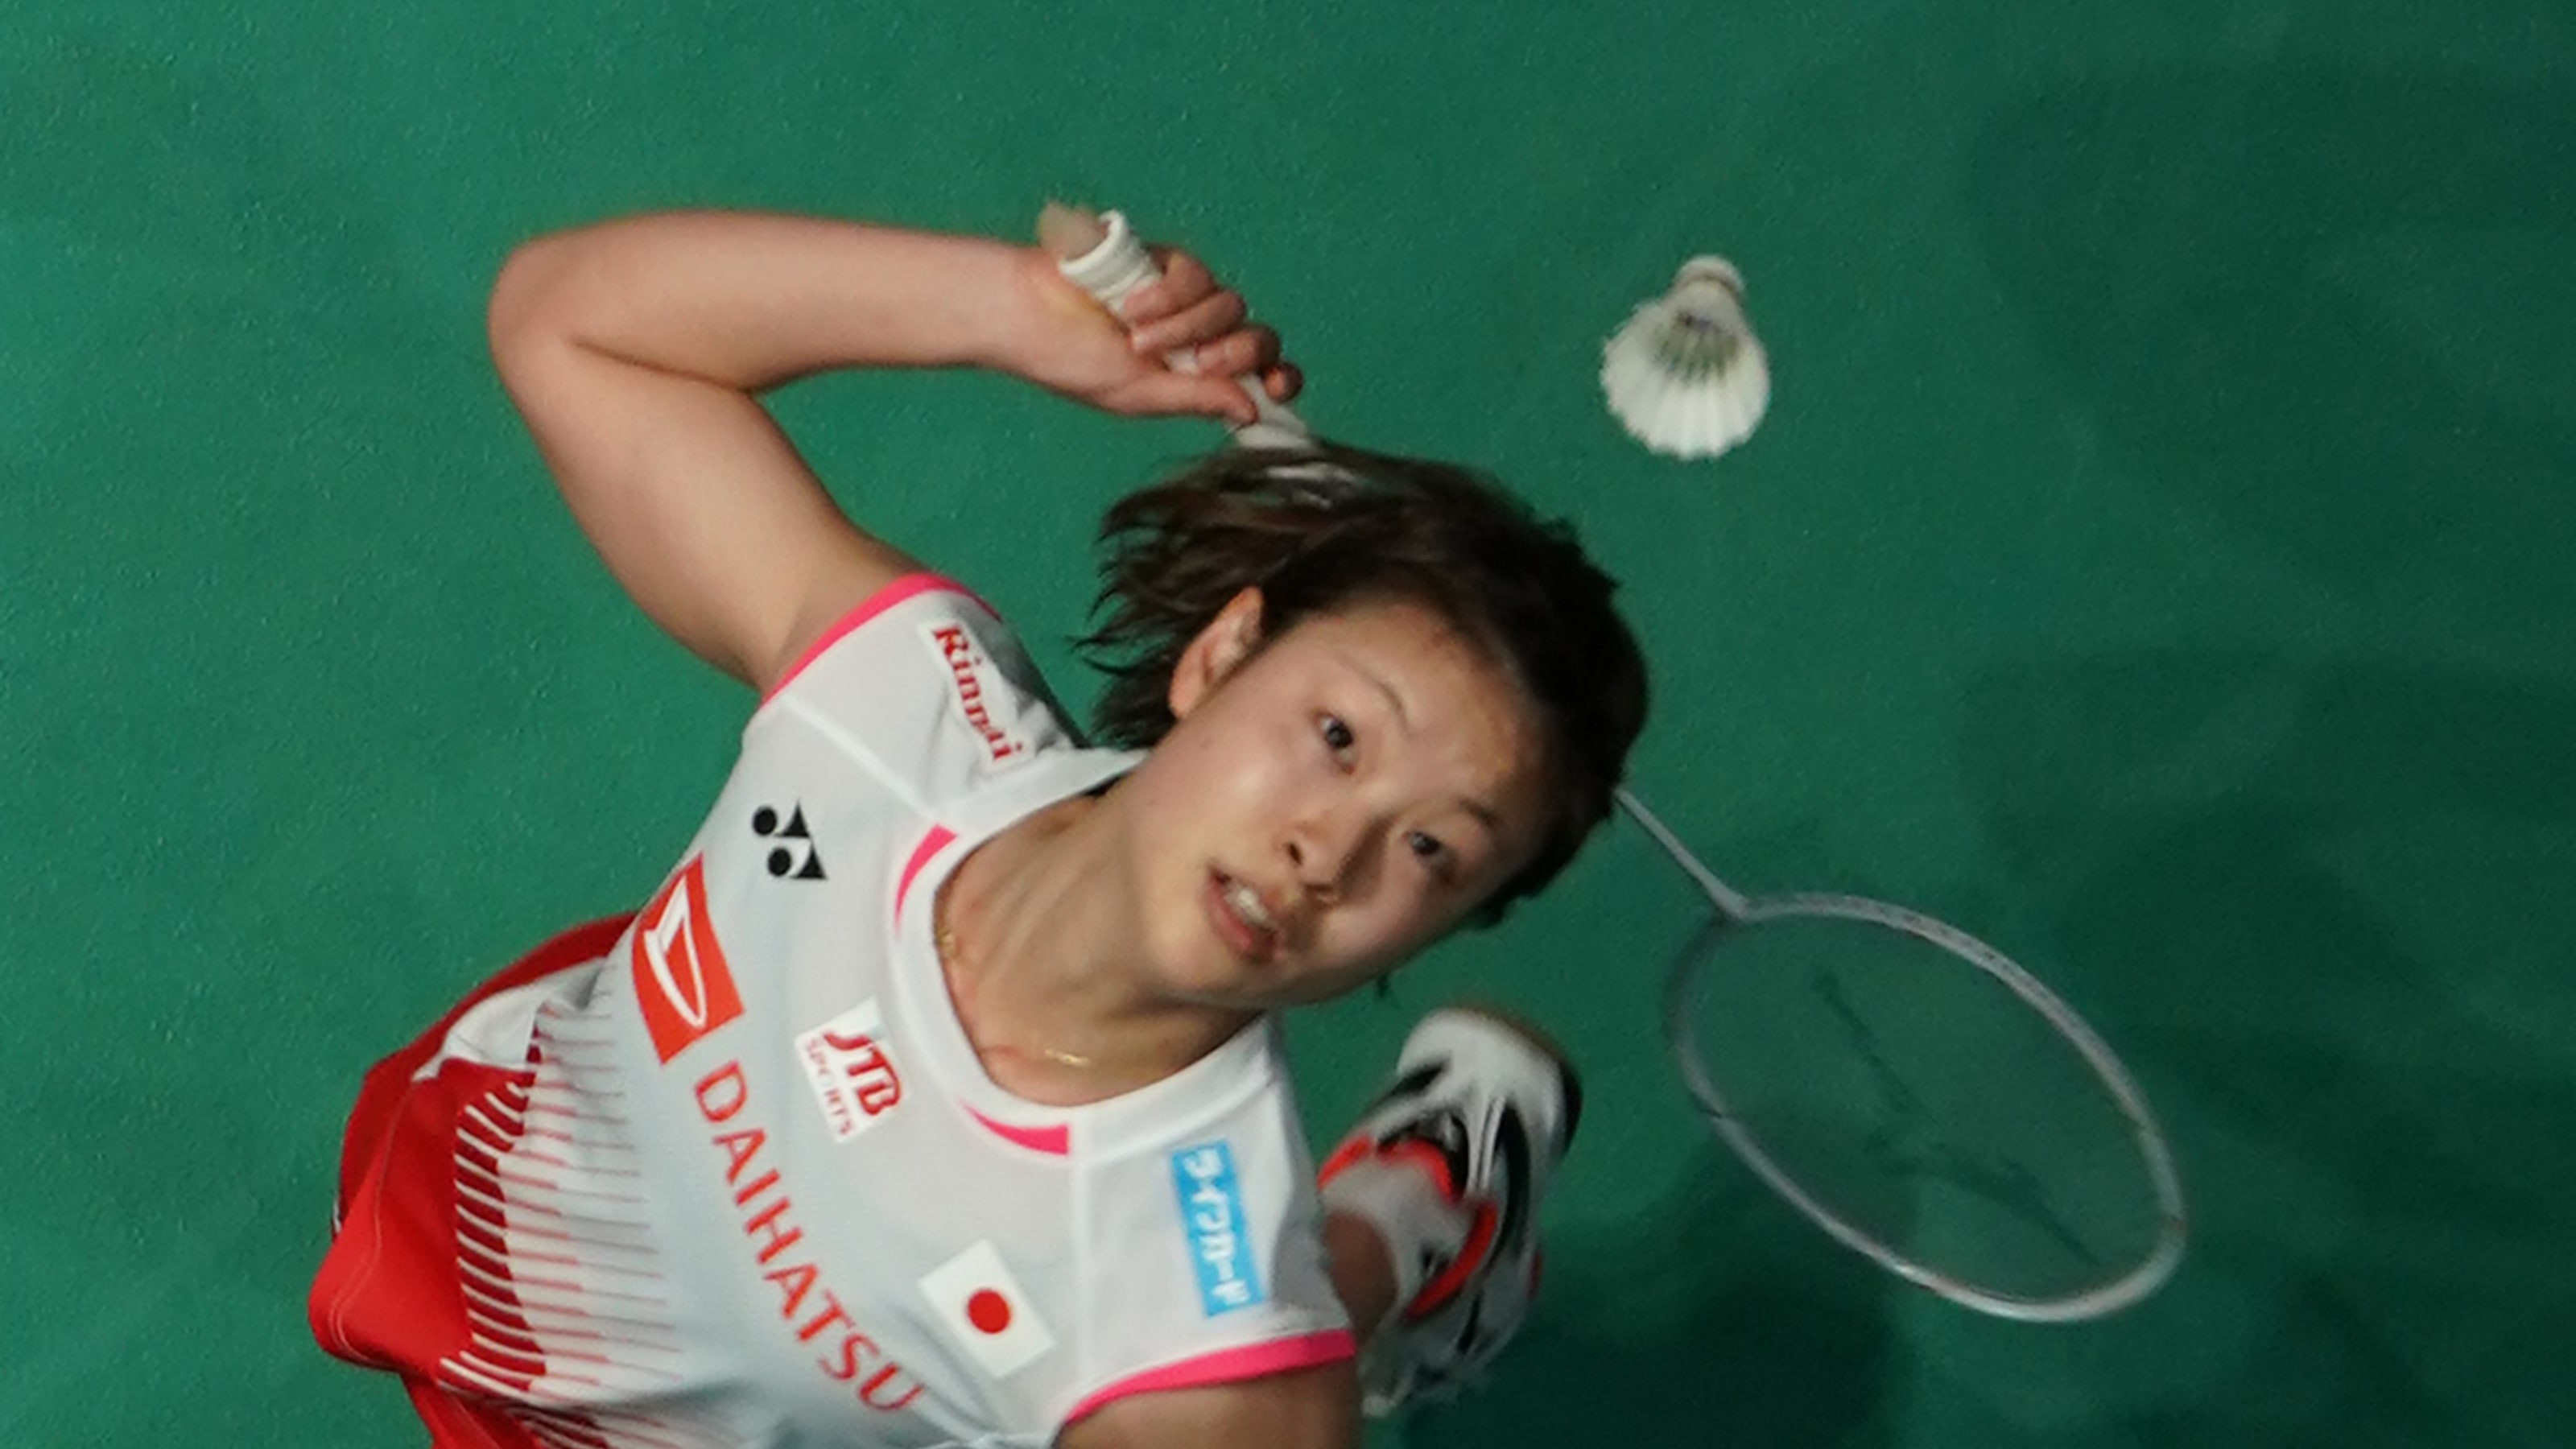 essential guide to the 2019 BWF Badminton World